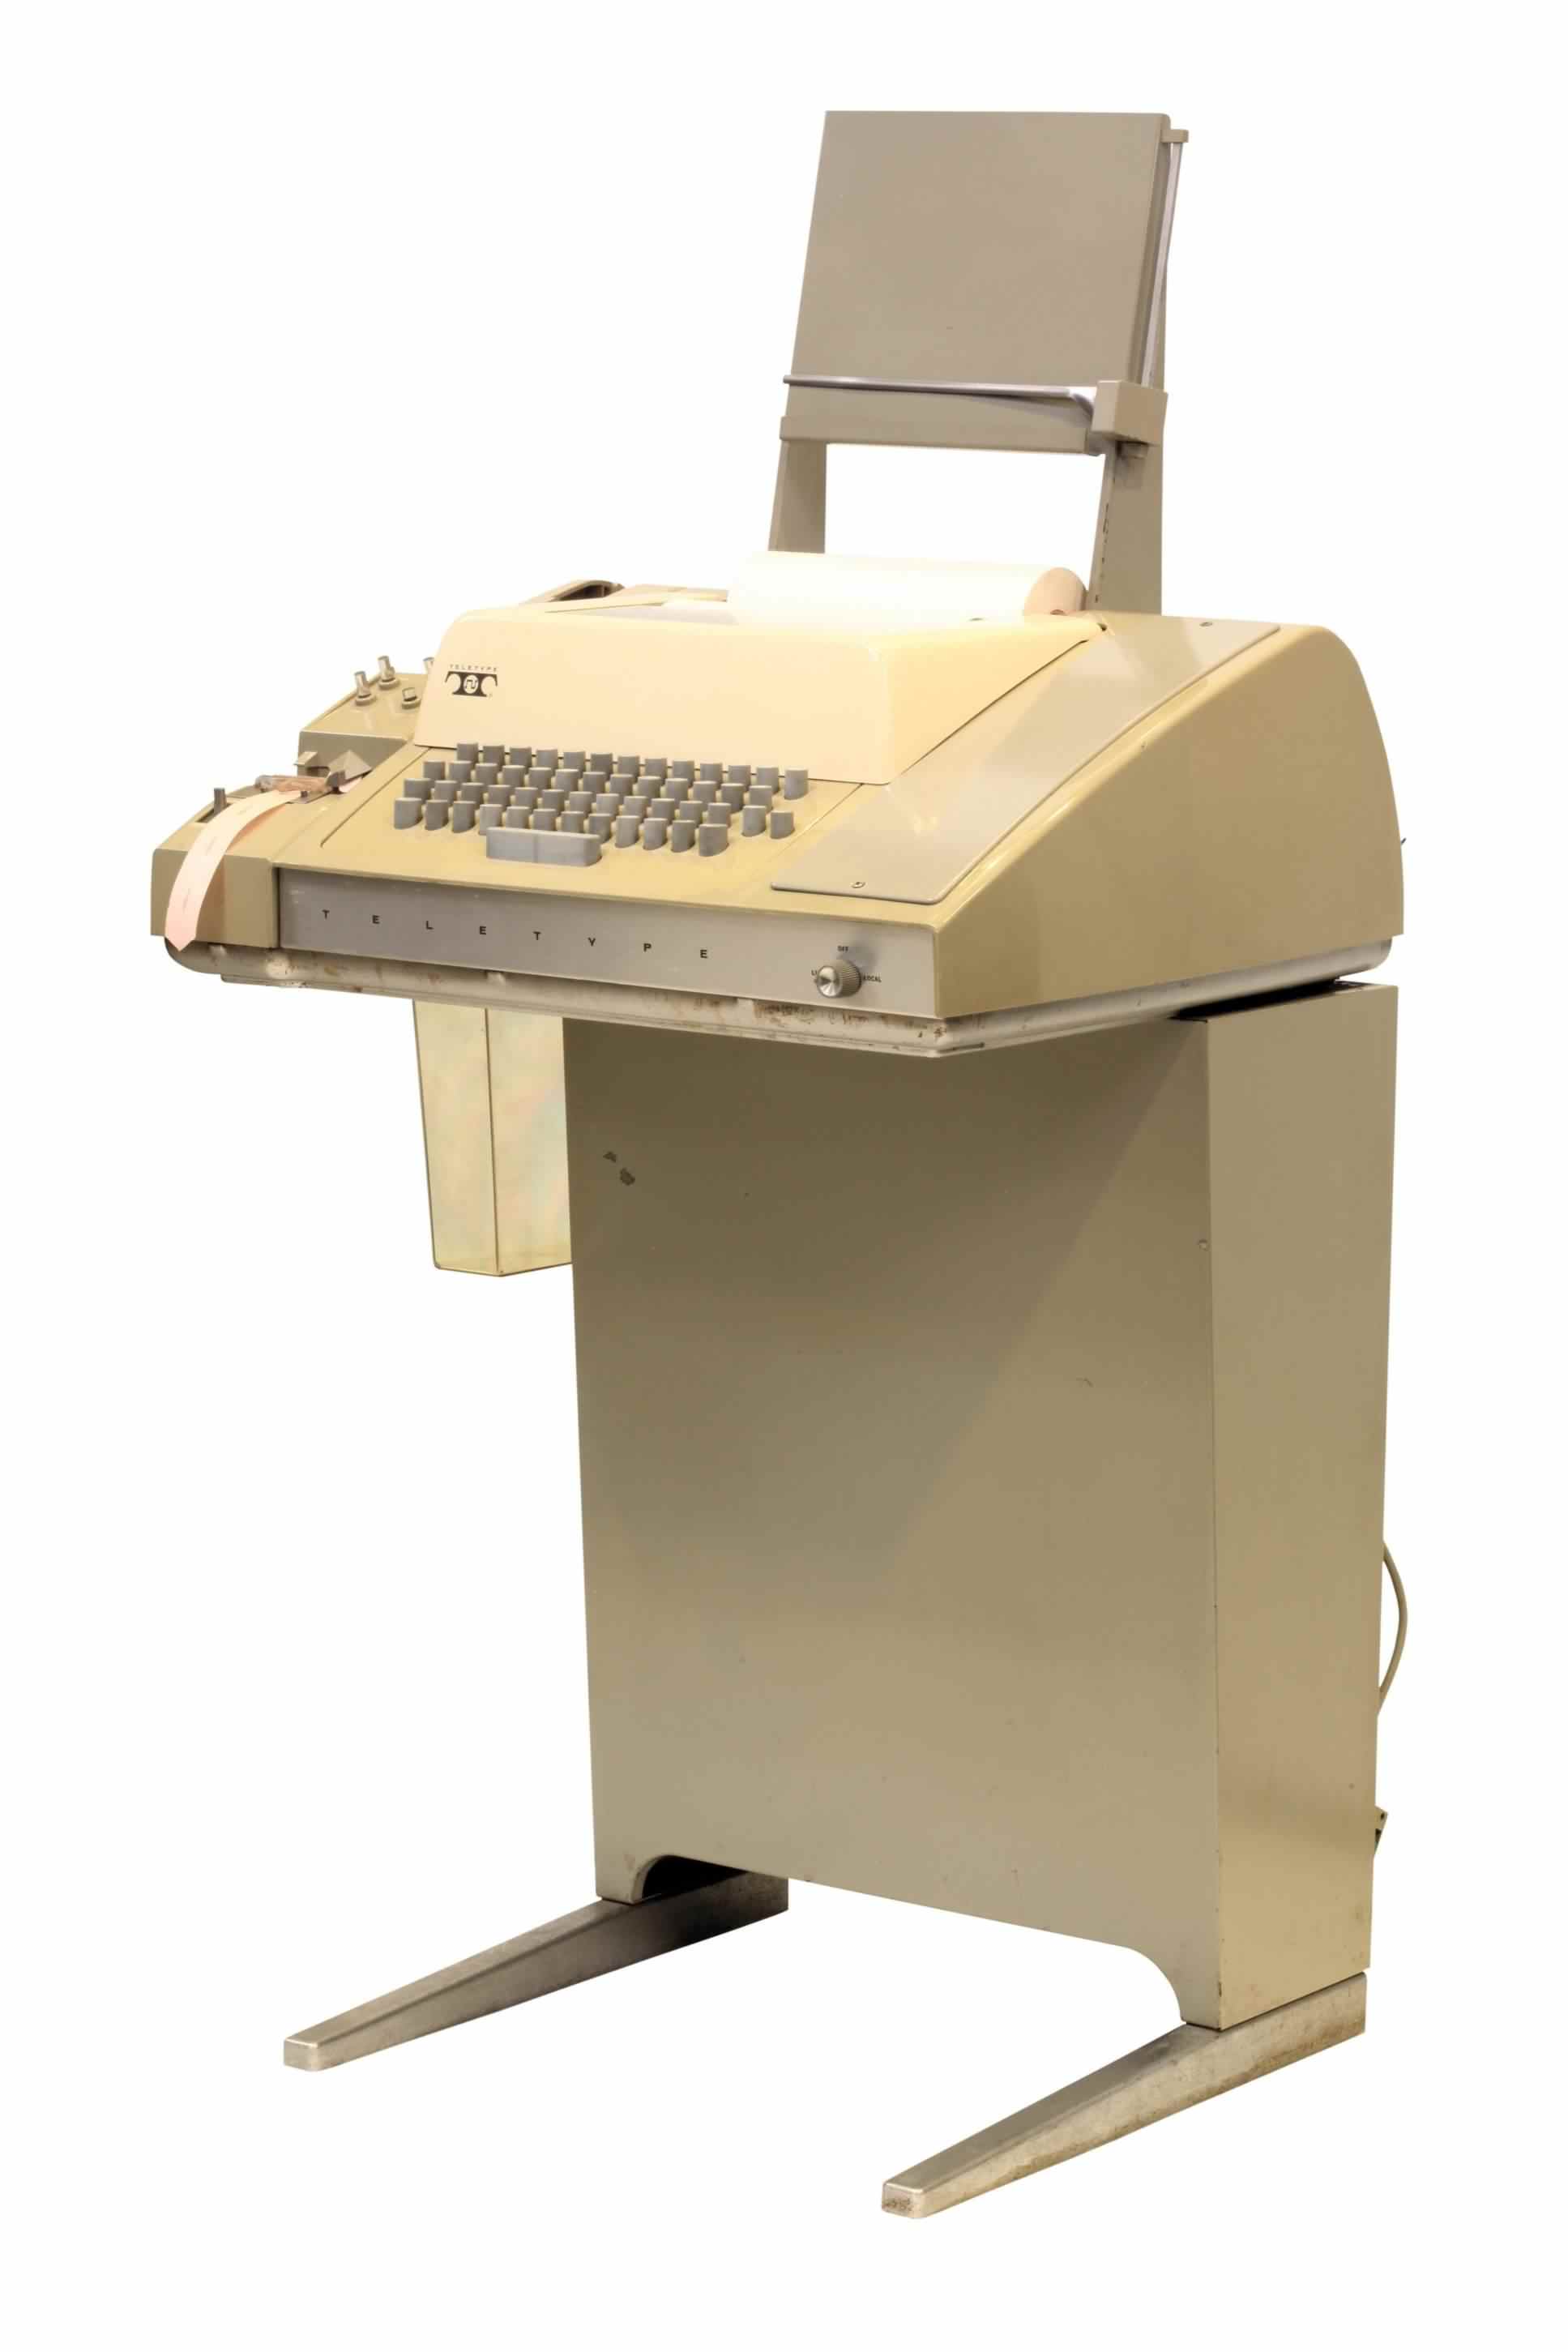 Teletype Corporation model ASR33, click for a larger image, photo licensed for reuse CCASA2.0